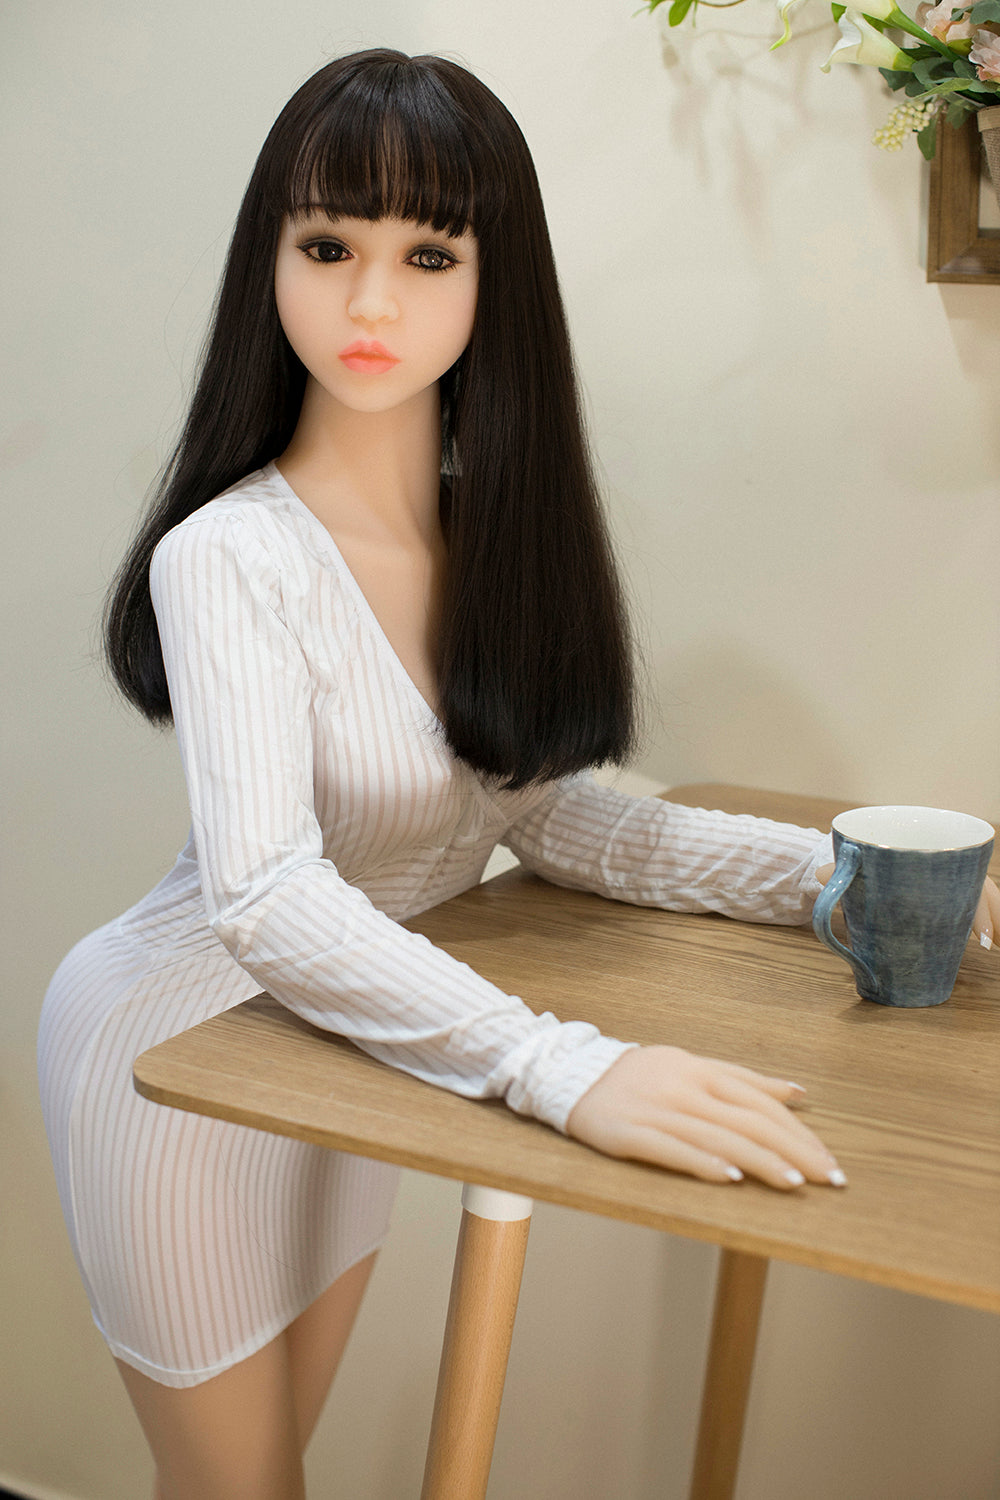 Kingmansion Janie 145cm A Cup Real Life Asian Sex Doll Sex Toy